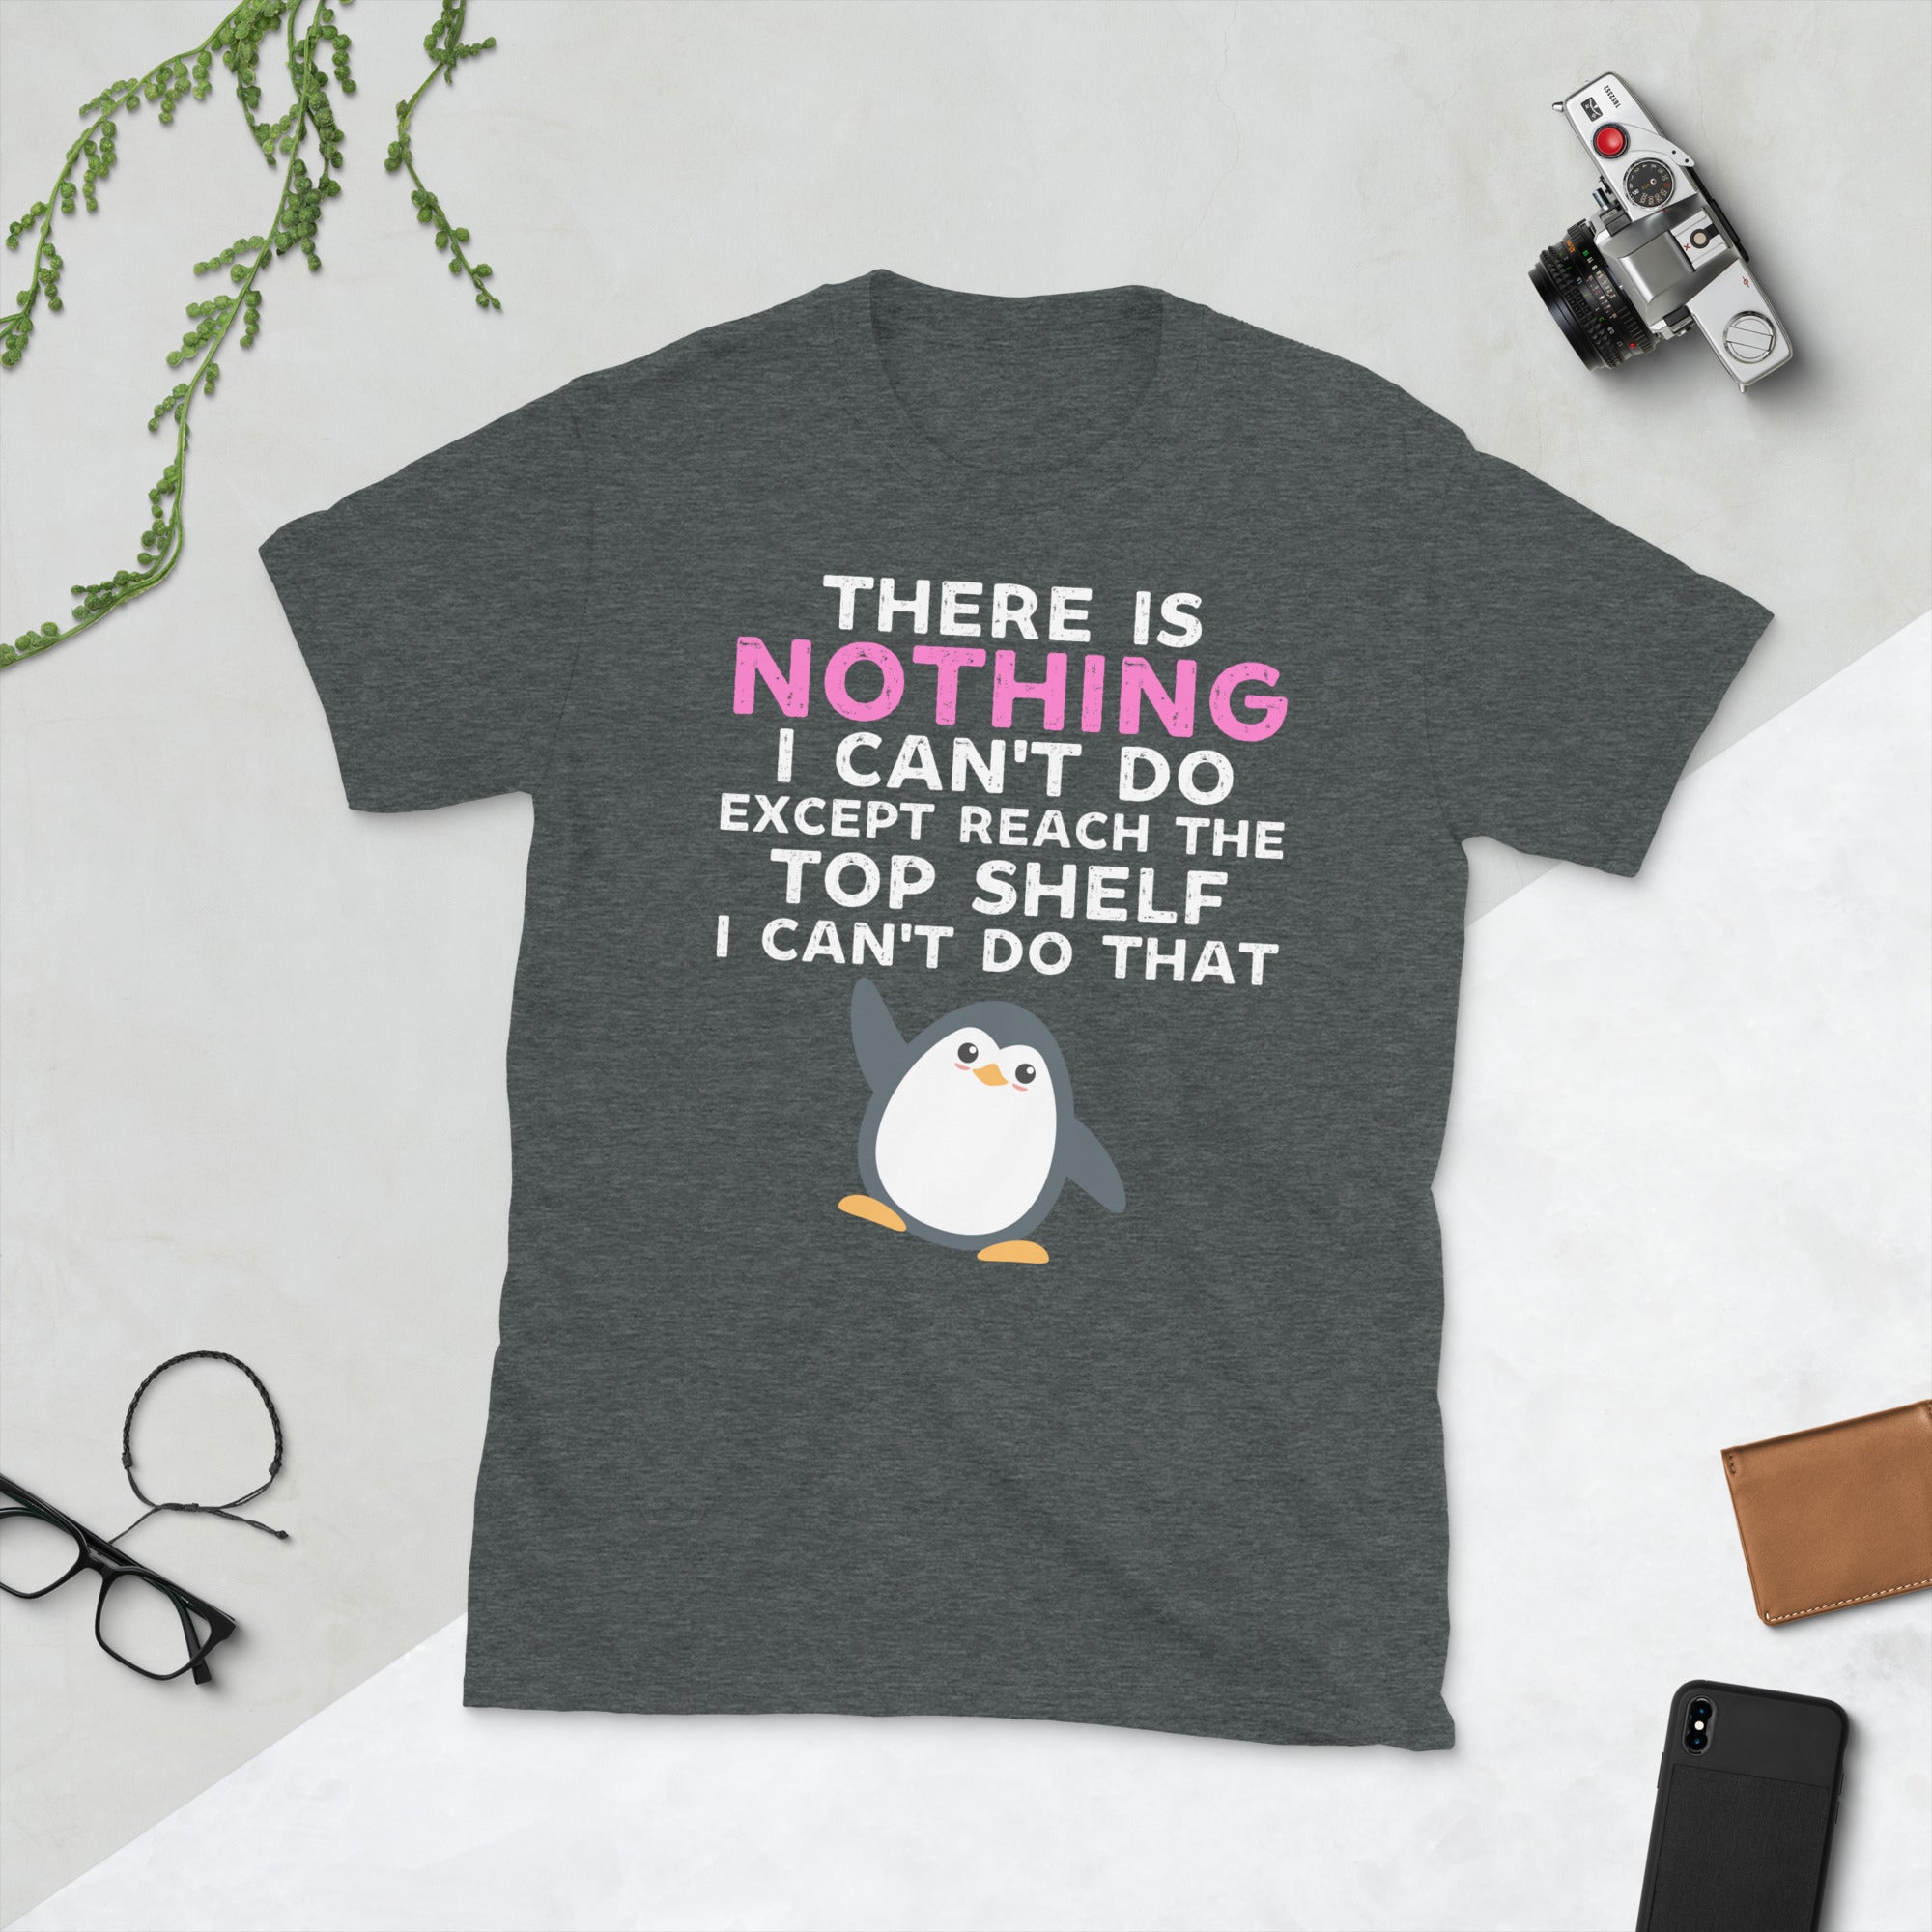 There Is Nothing I Can’t Do Except Reach The Top Shelf I Cant Do That, Funny Short Girls Shirt, Funny Sayings Shirts, Short Girls Problem